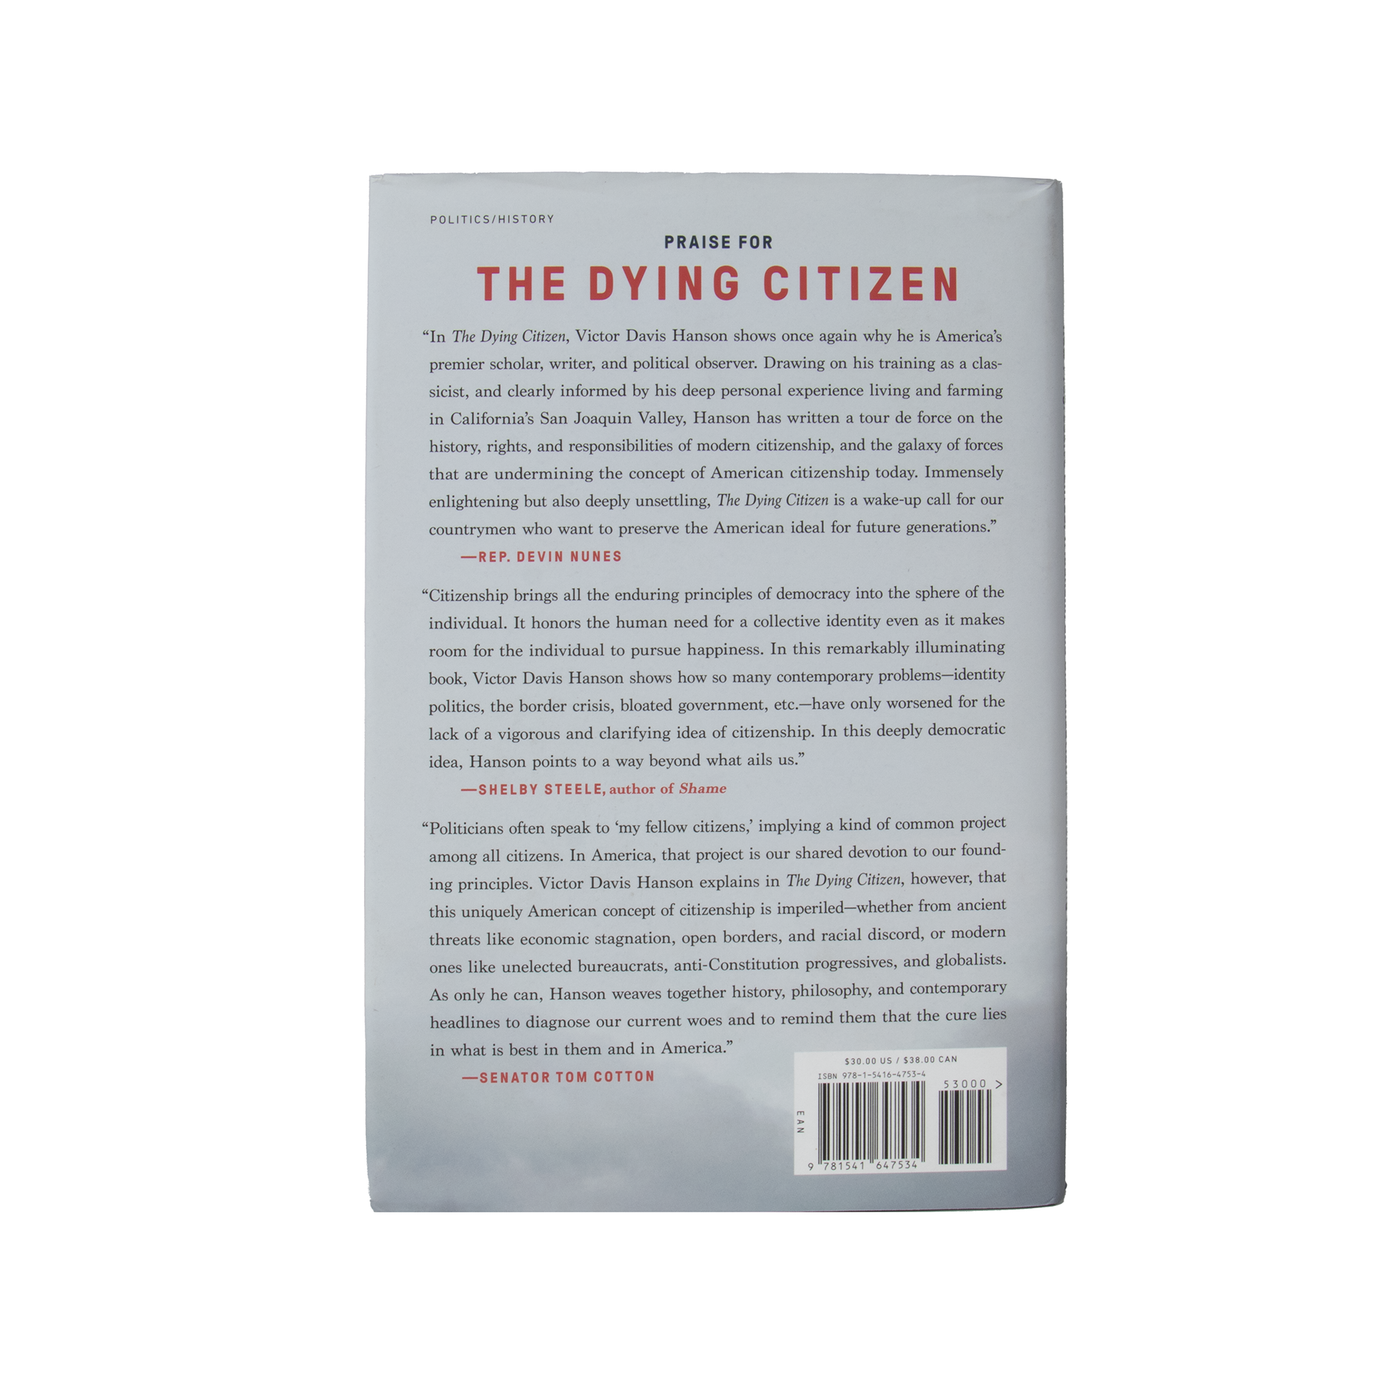 The Dying Citizen: How Progressive Elites, Tribalism, and Globalization Are Destroying the Idea of America by Victor Davis Hanson